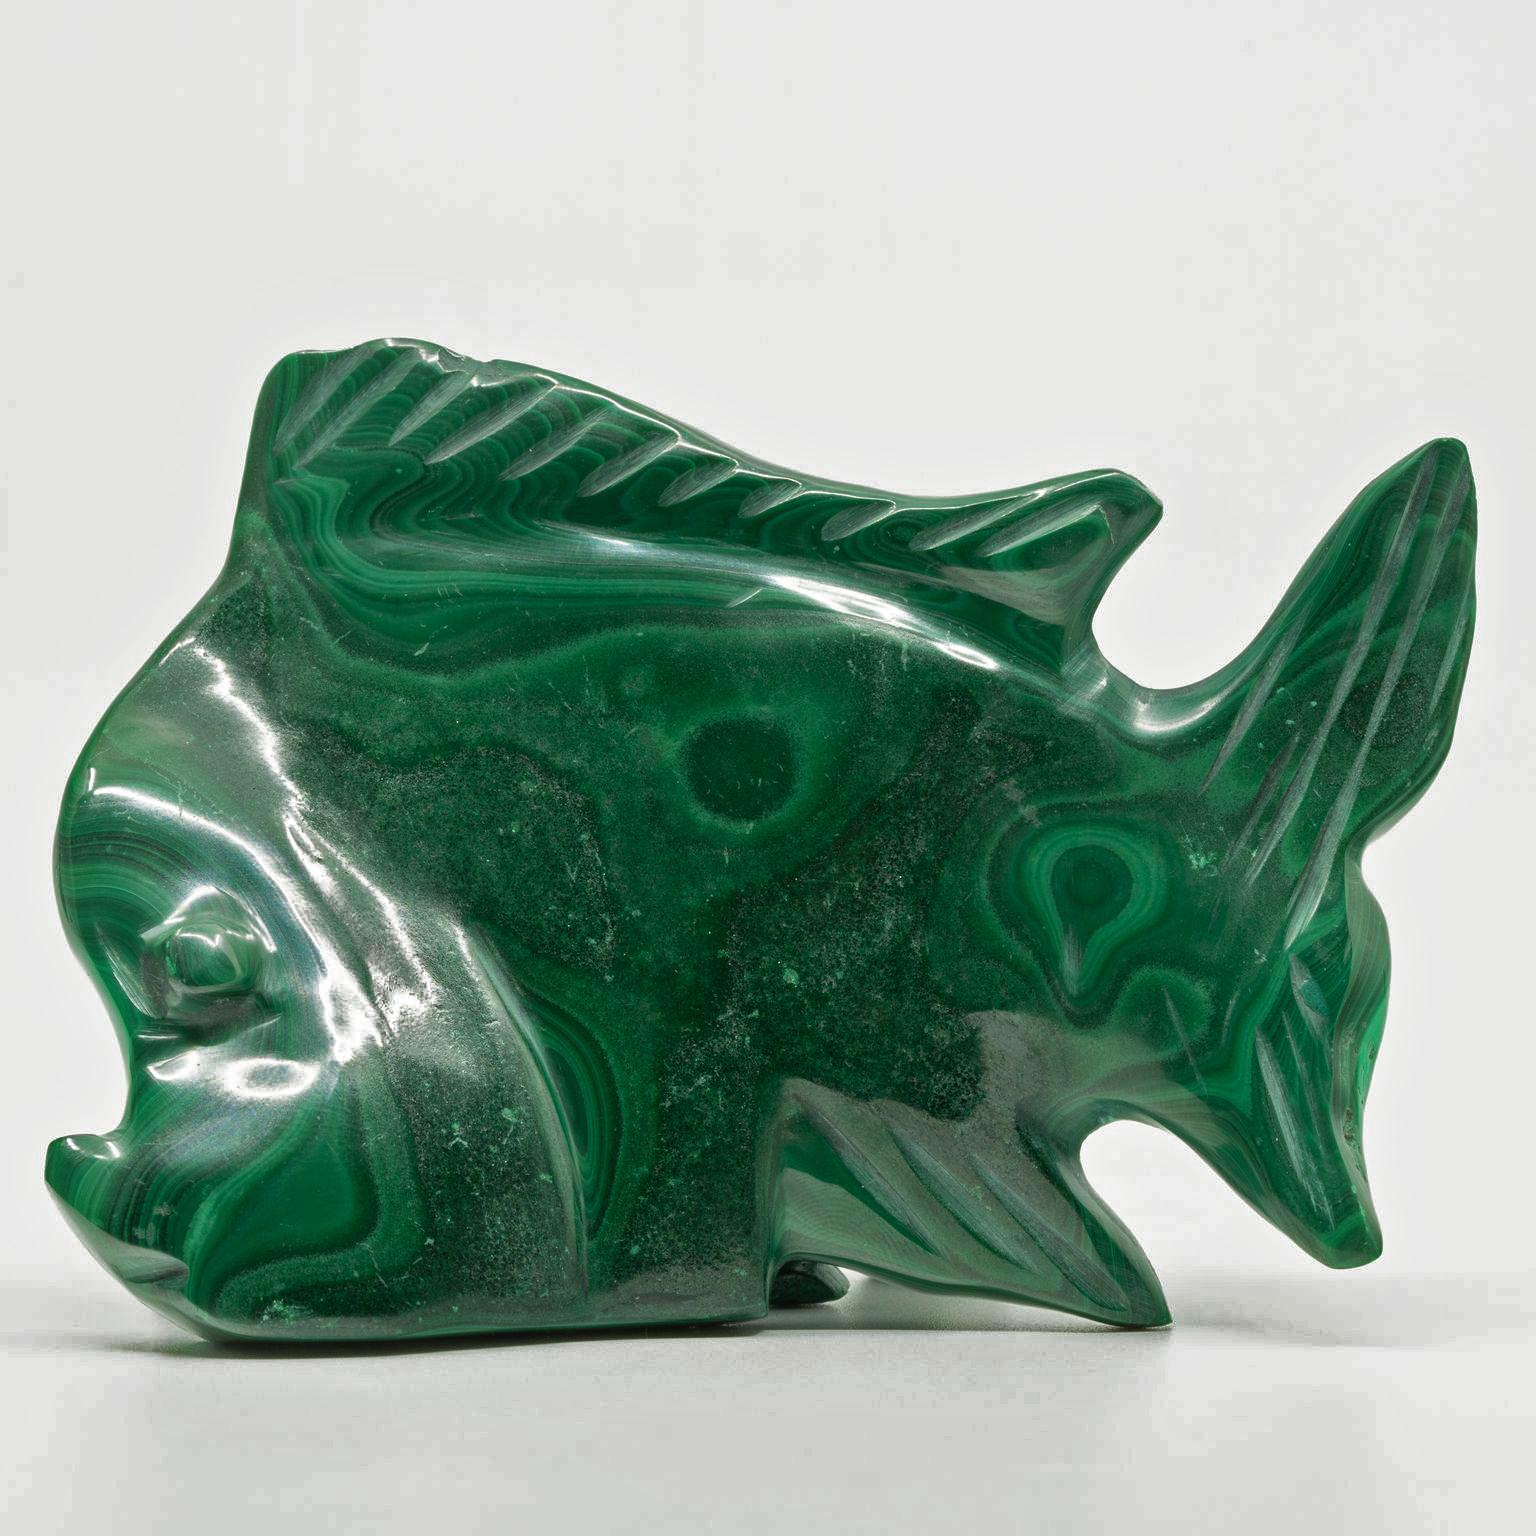 Hand-Carved Genuine Hand Carved Malachite Fish // 272 Grams For Sale